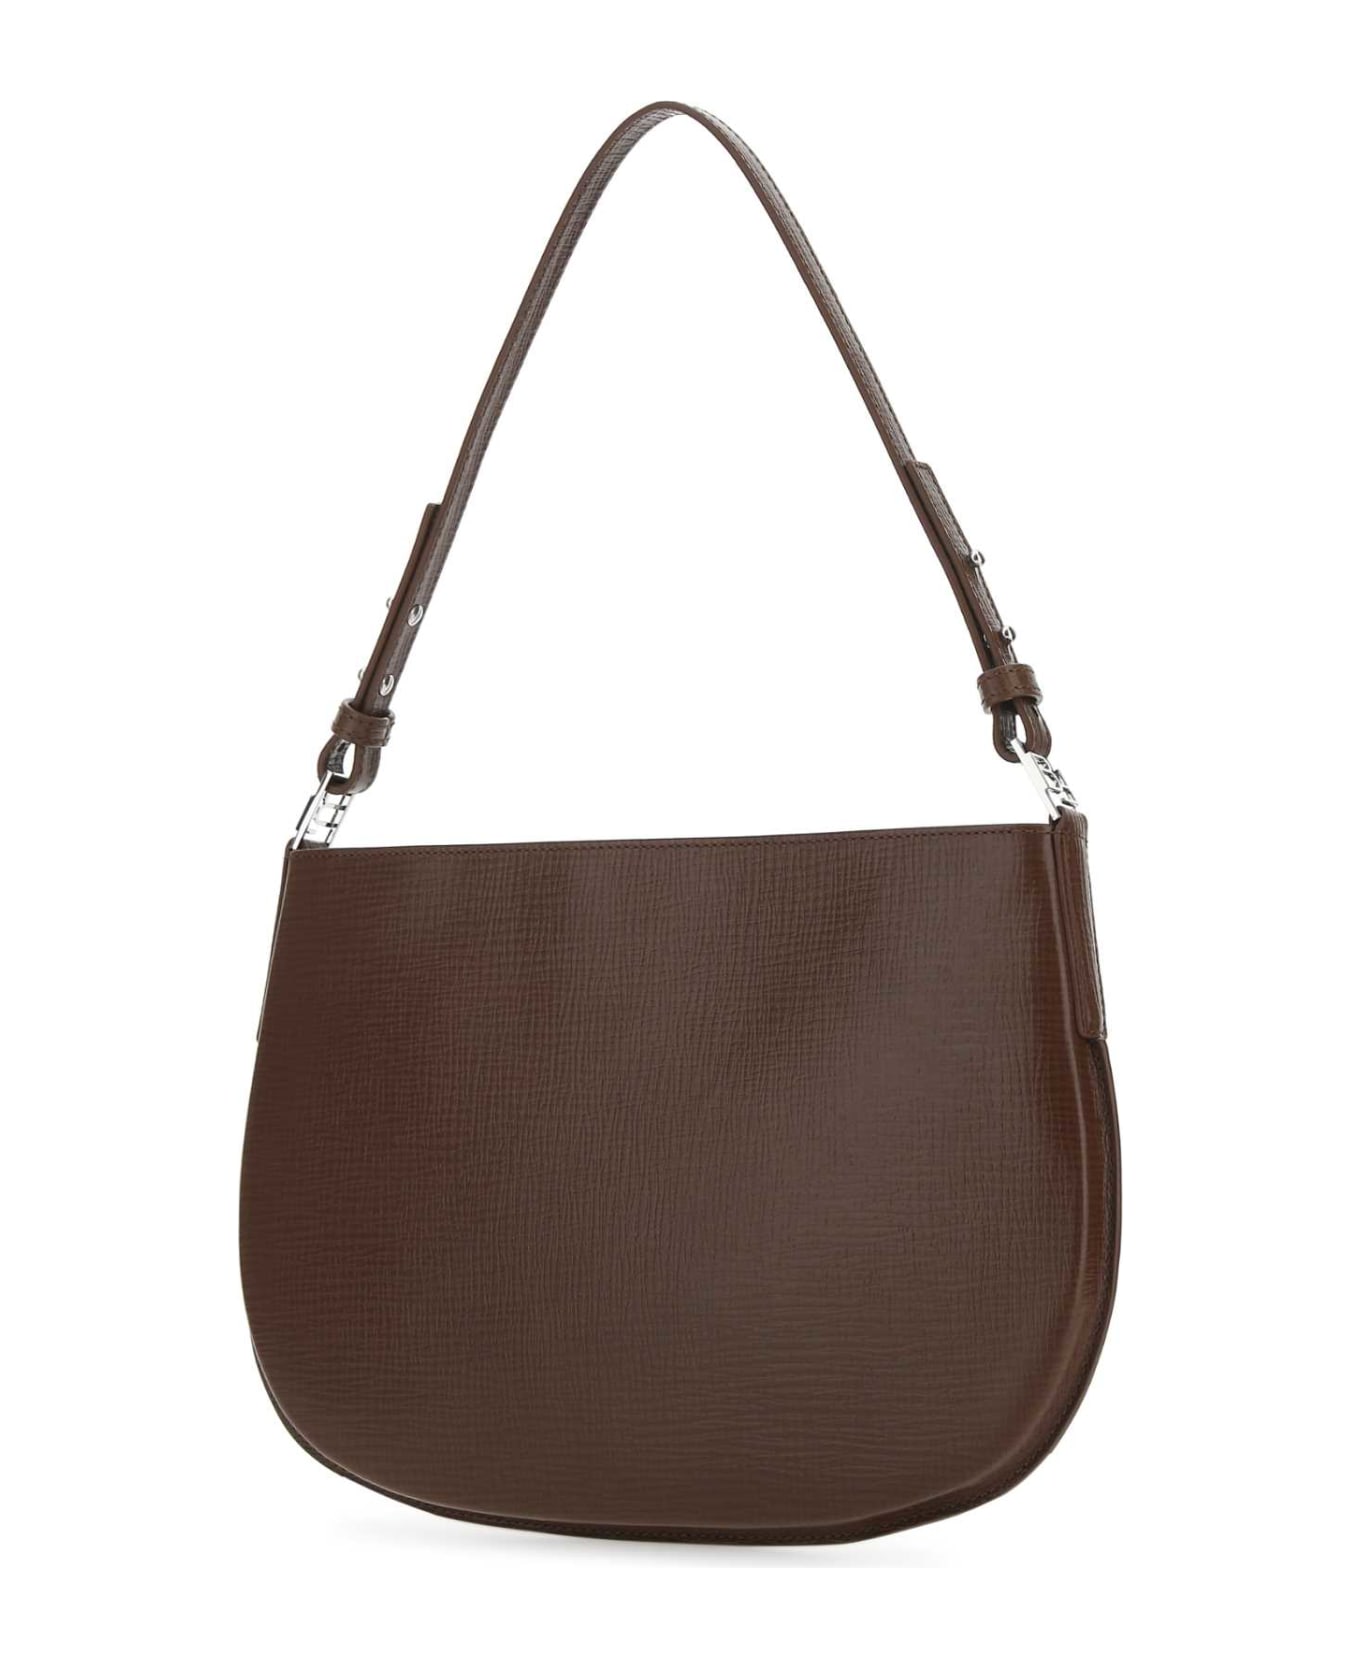 BY FAR Brown Leather Issa Shoulder Bag - TABAC